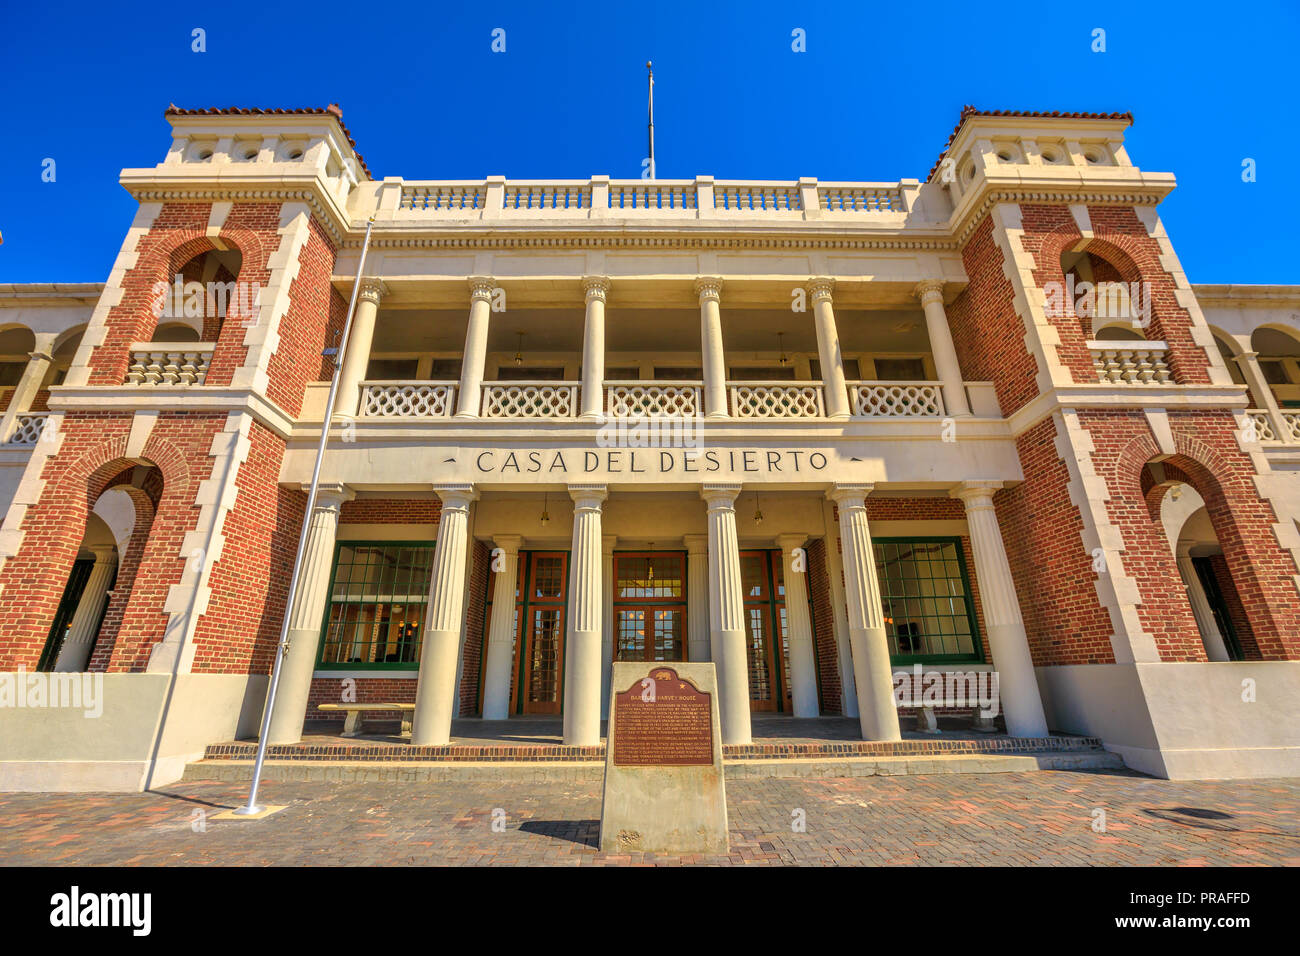 Barstow, California, USA - August 15, 2018: Barstow Harvey House or Harvey House Railroad Depot and Barstow Station, is a historic building that served as Hotel and Santa Fe Railroad depot. Stock Photo